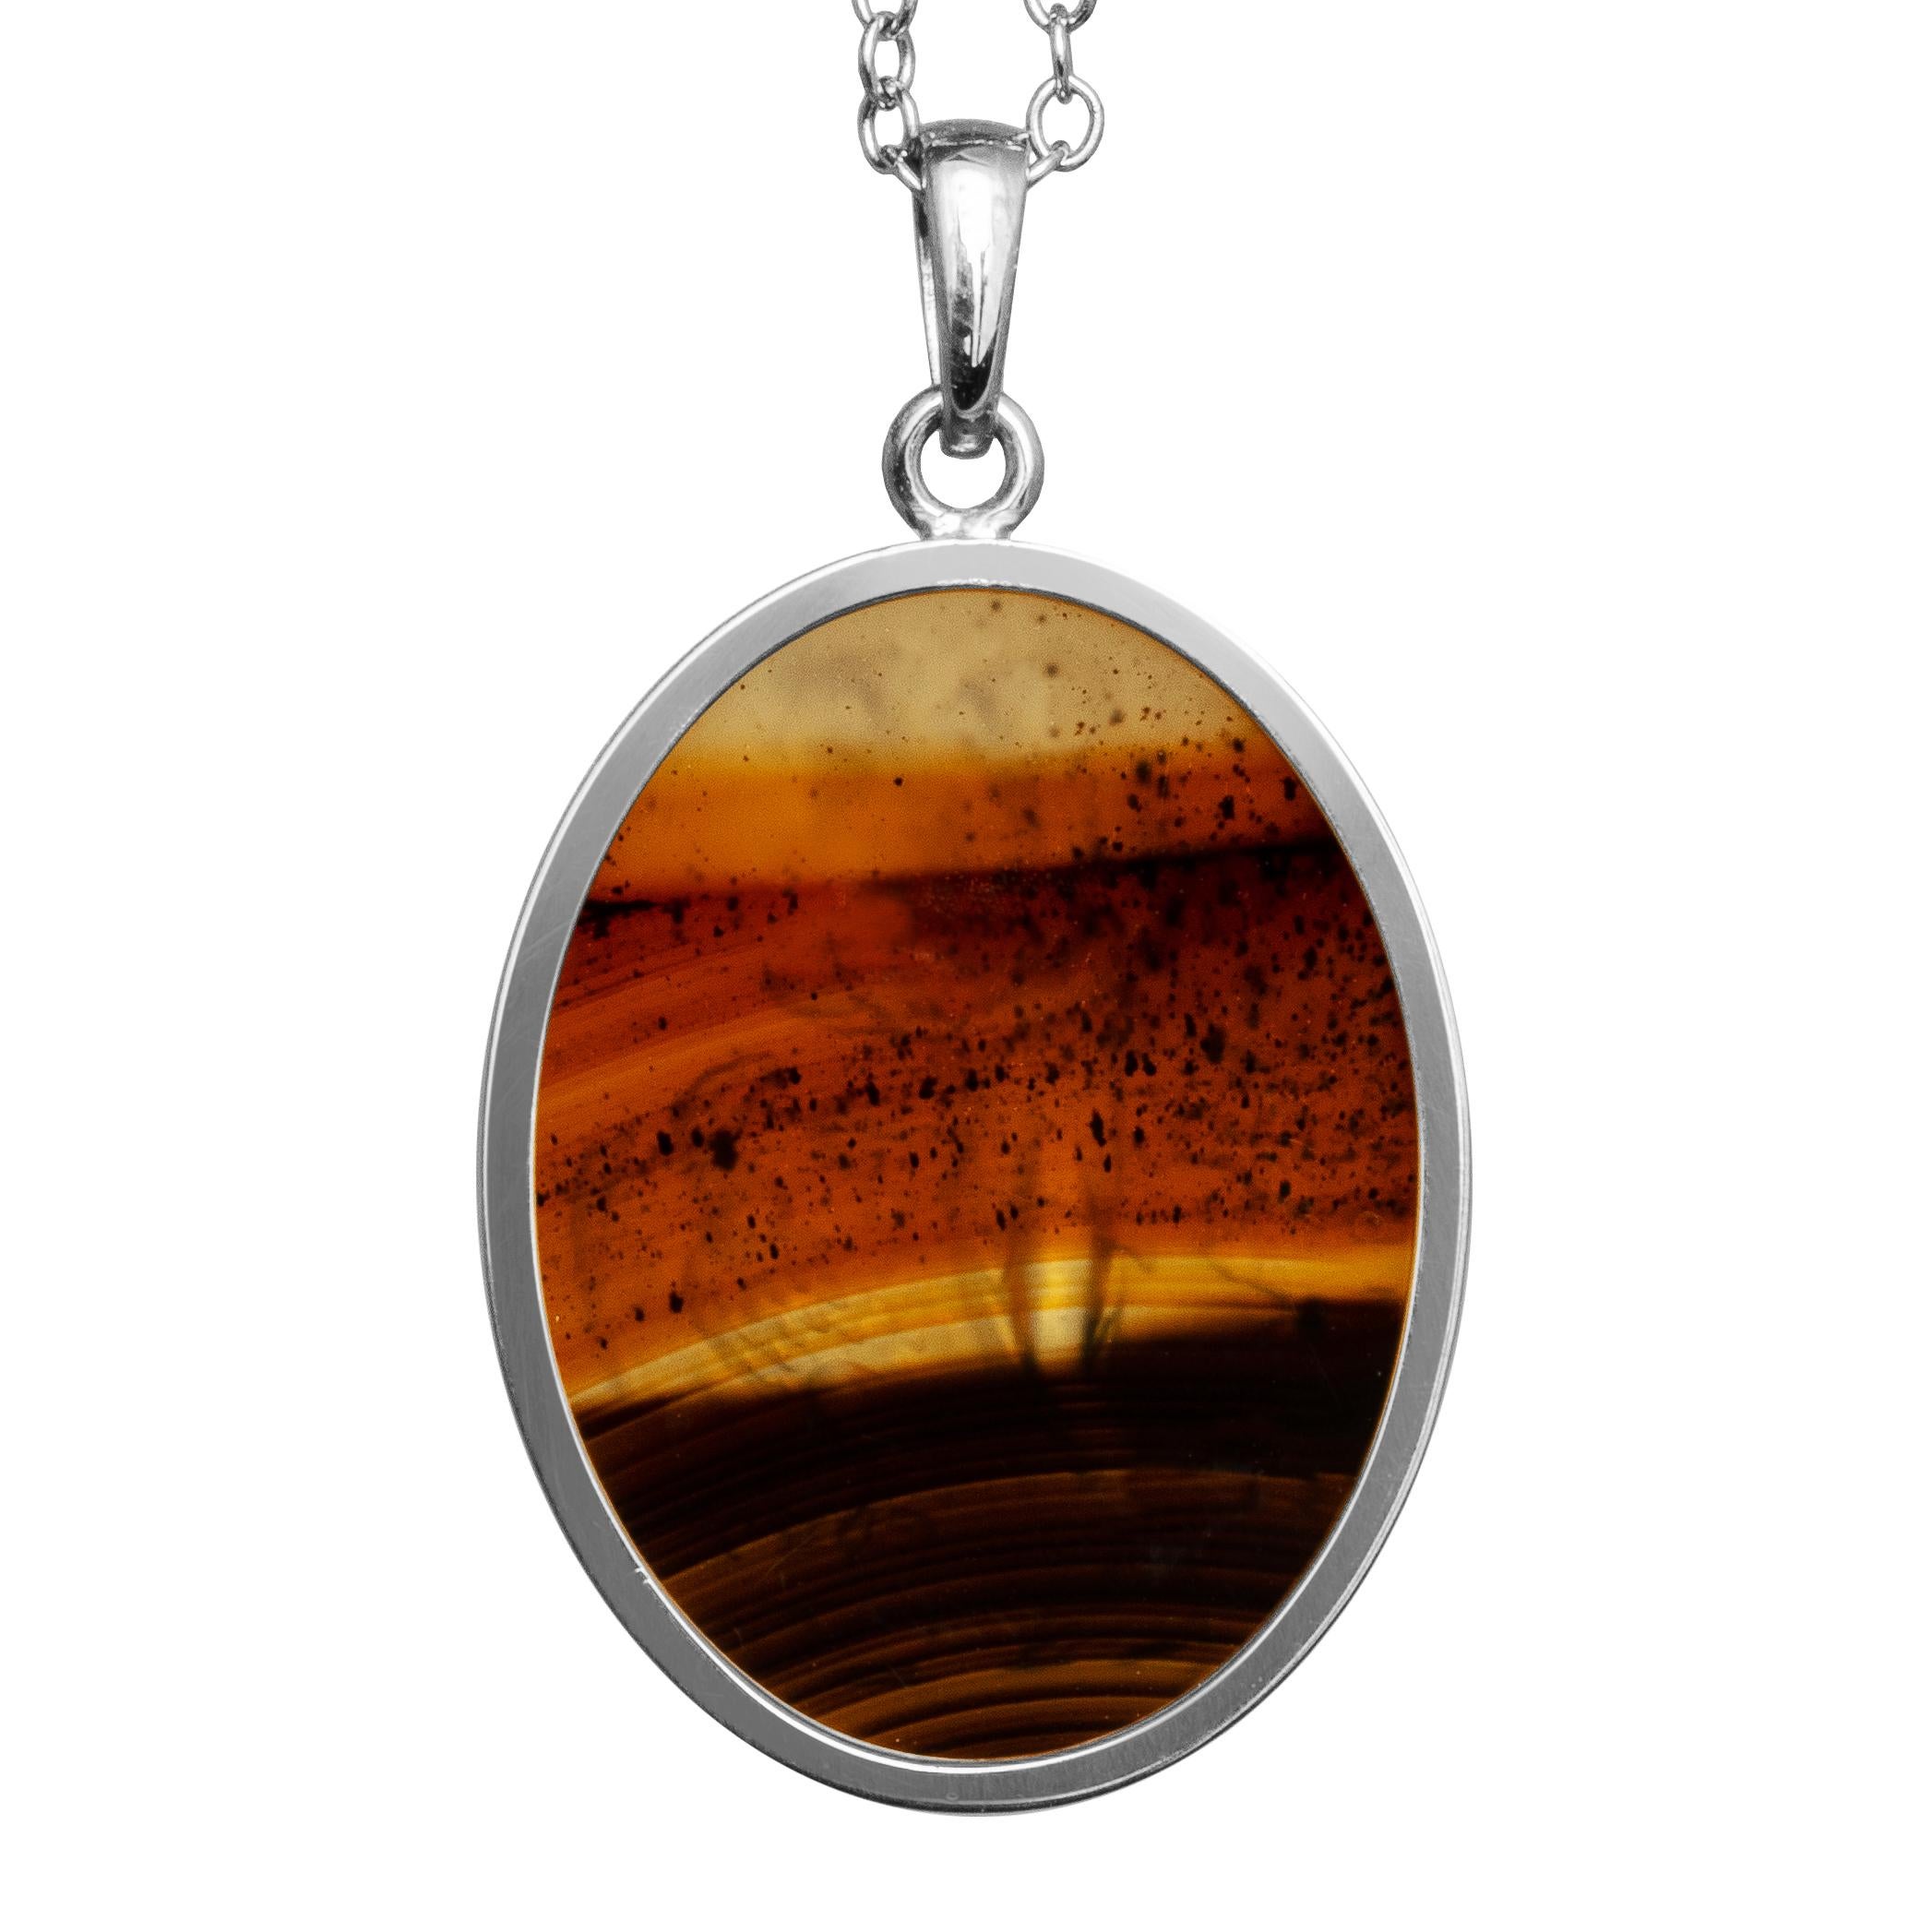 This exquisite intaglio is masterfully engraved onto a Montana agate specimen and features a depiction of Hebe & Zeus. The stone is set in a sterling silver pendant. Montana agate is highly prized for its rich color and striking patterns.

Hebe was